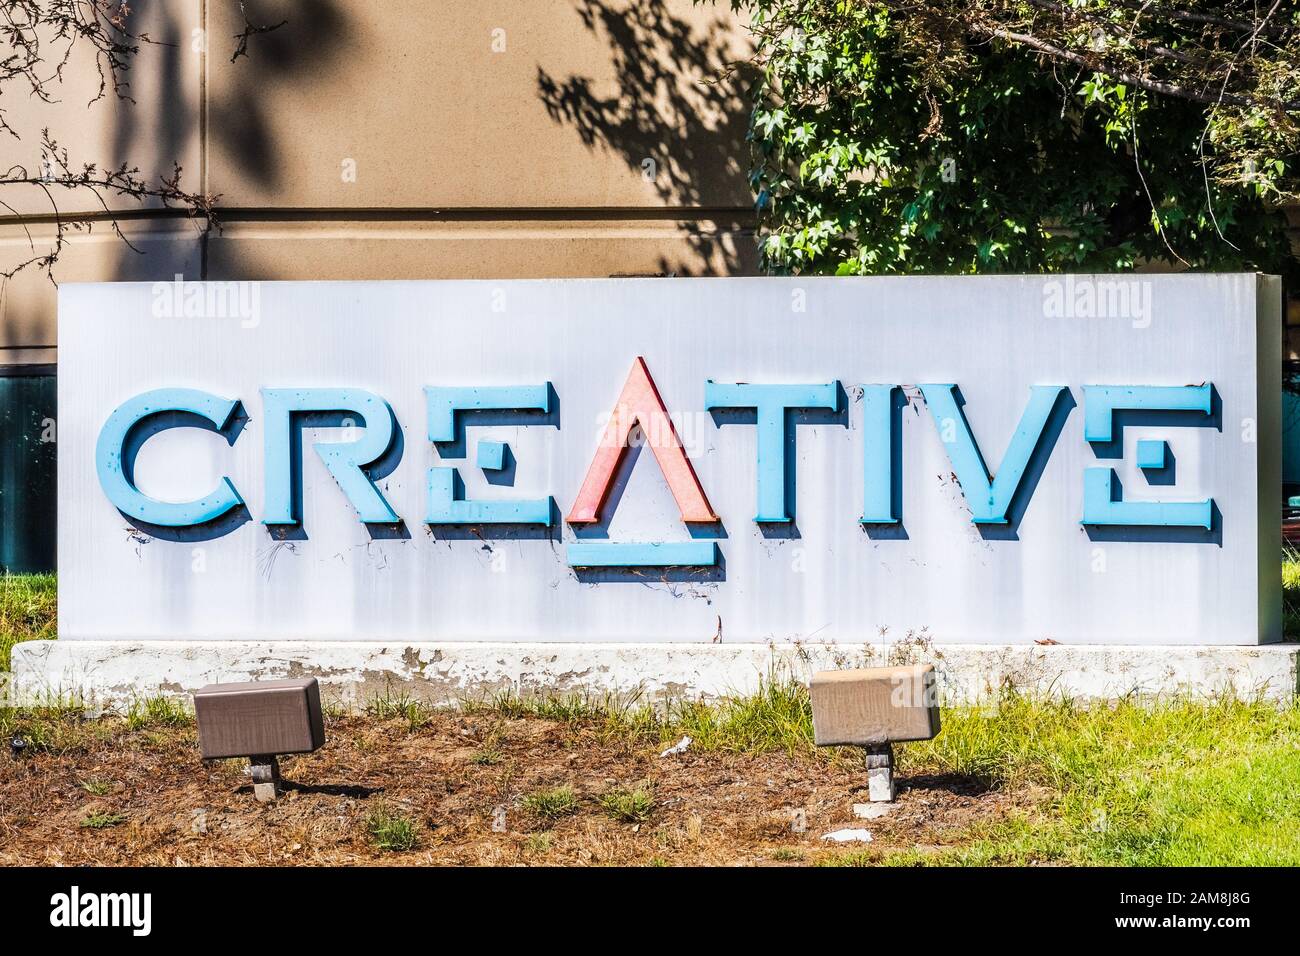 Oct 9, 2019 Milpitas / CA / USA - Creative offices in Silicon Valley; Creative Technology Ltd. (known as Creative Labs in the United States) is a glob Stock Photo